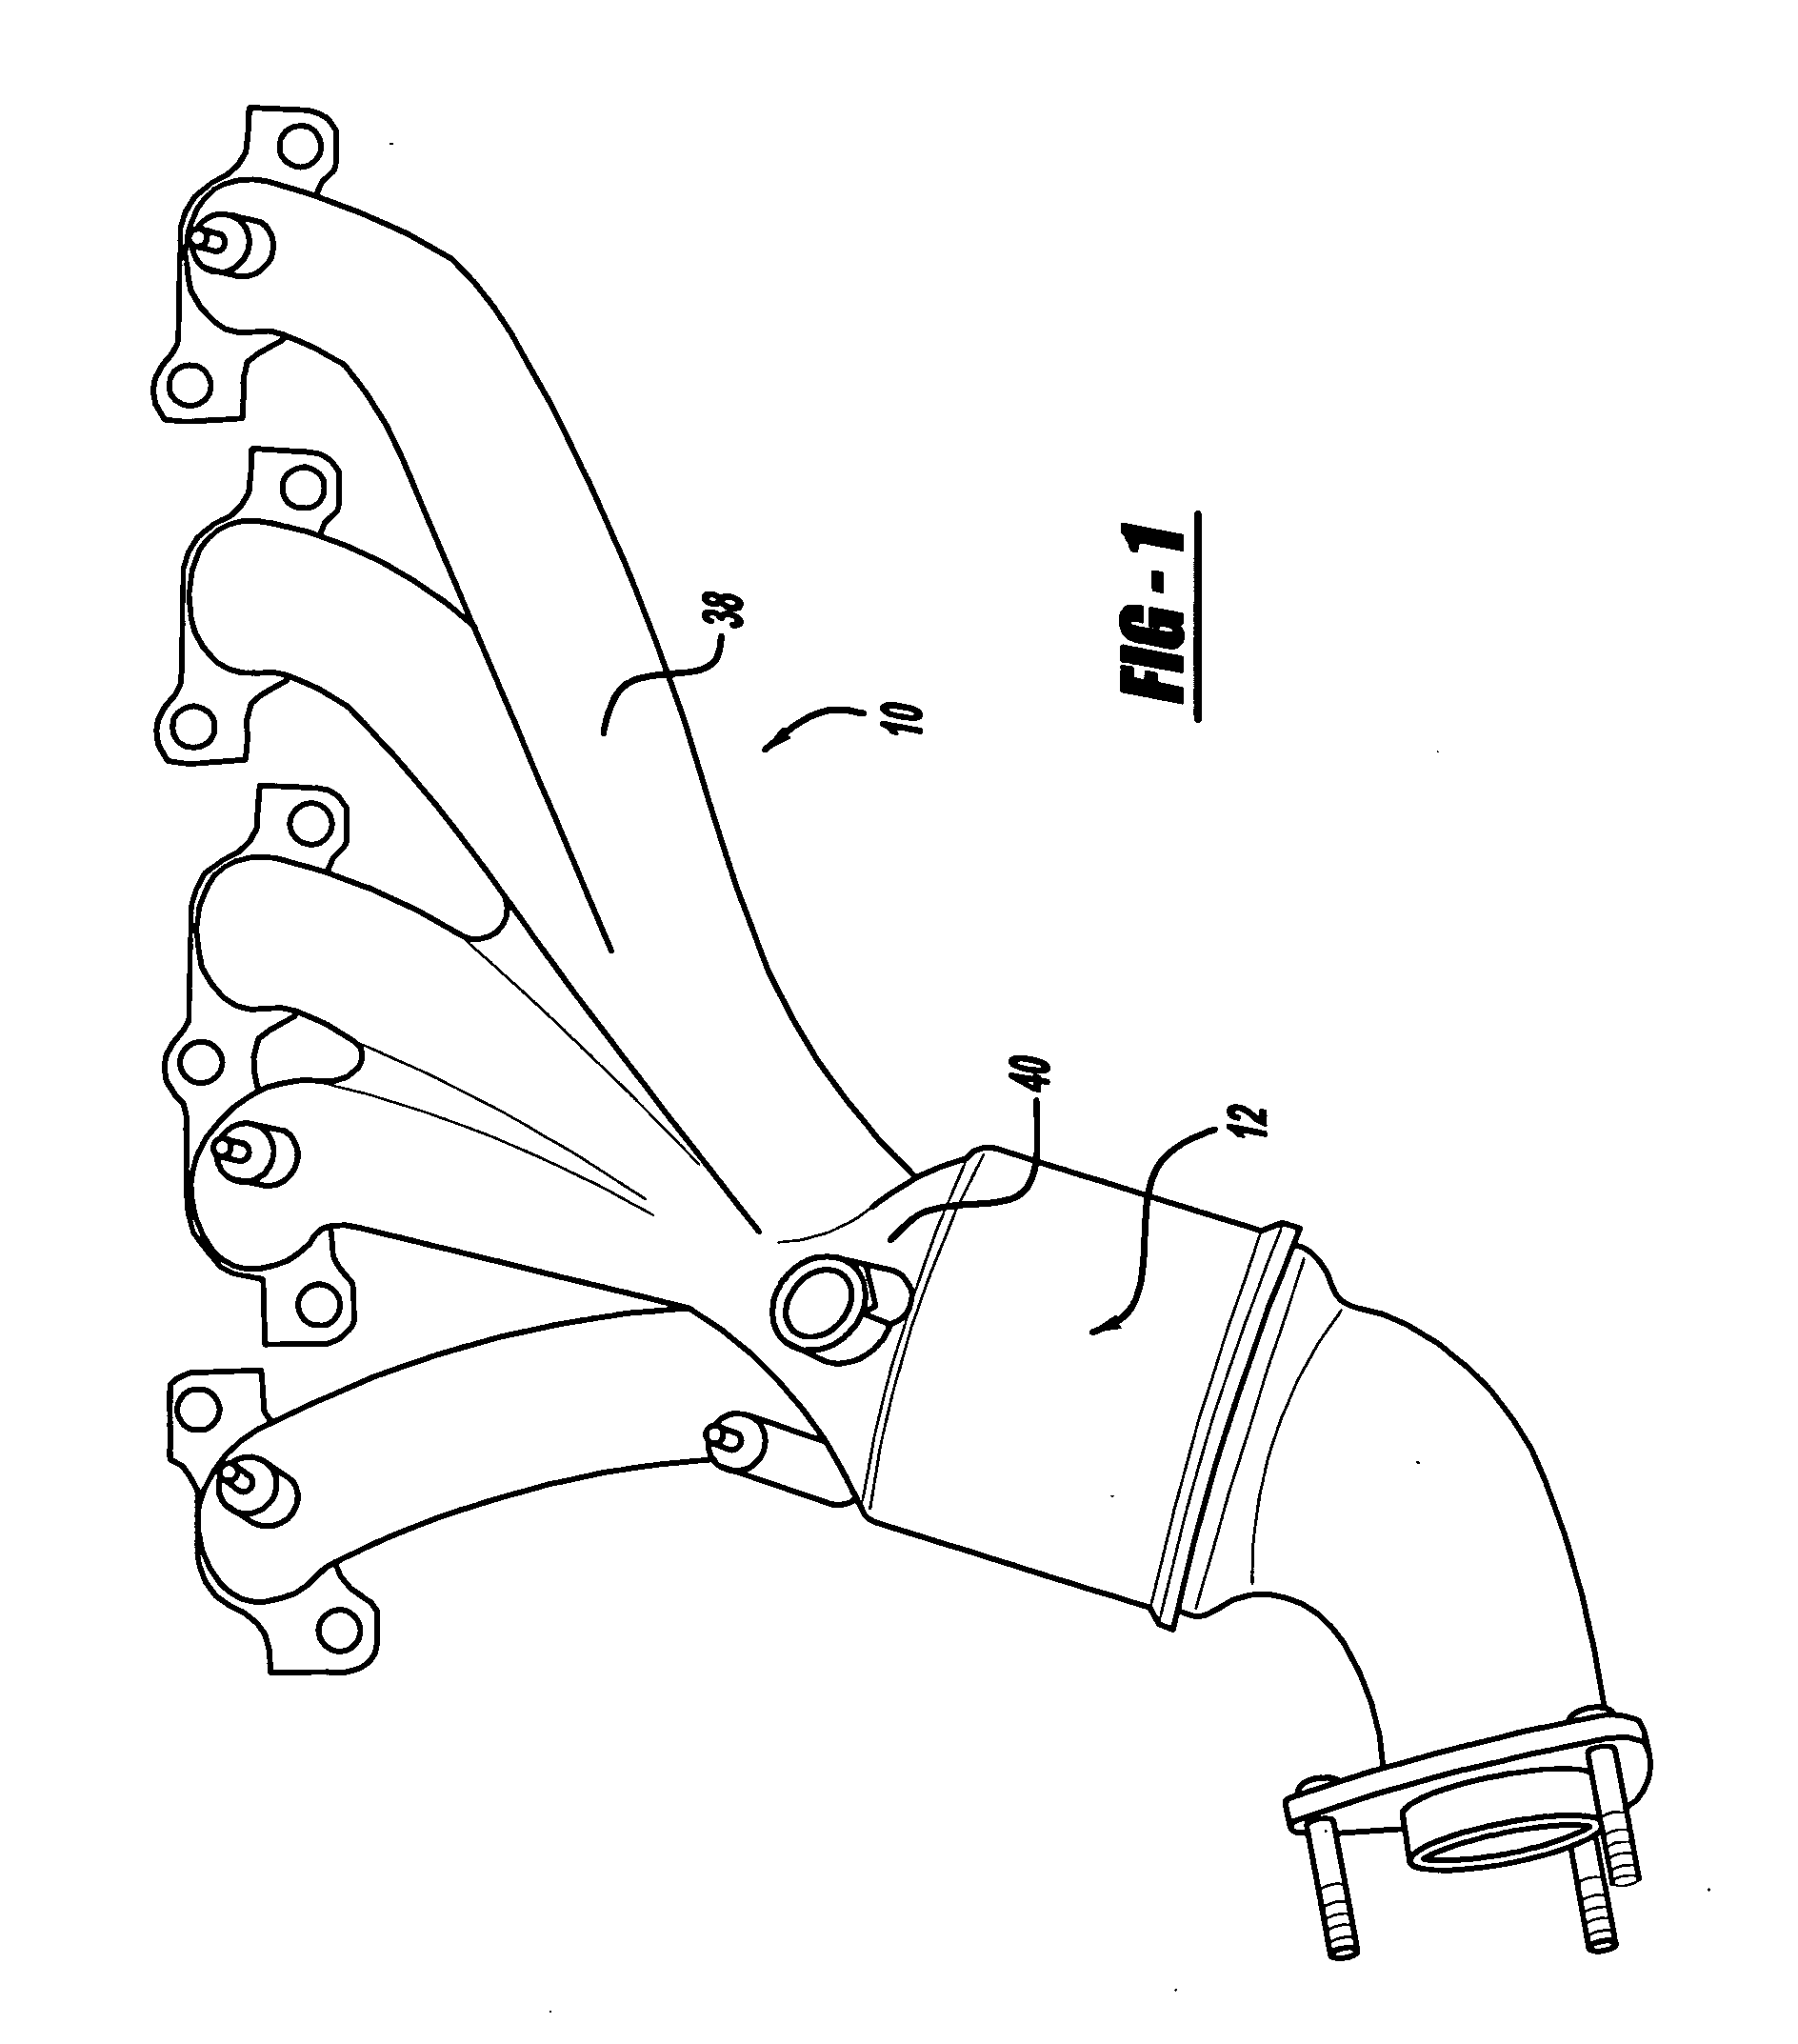 One piece catalytic converter with integral exhaust manifold